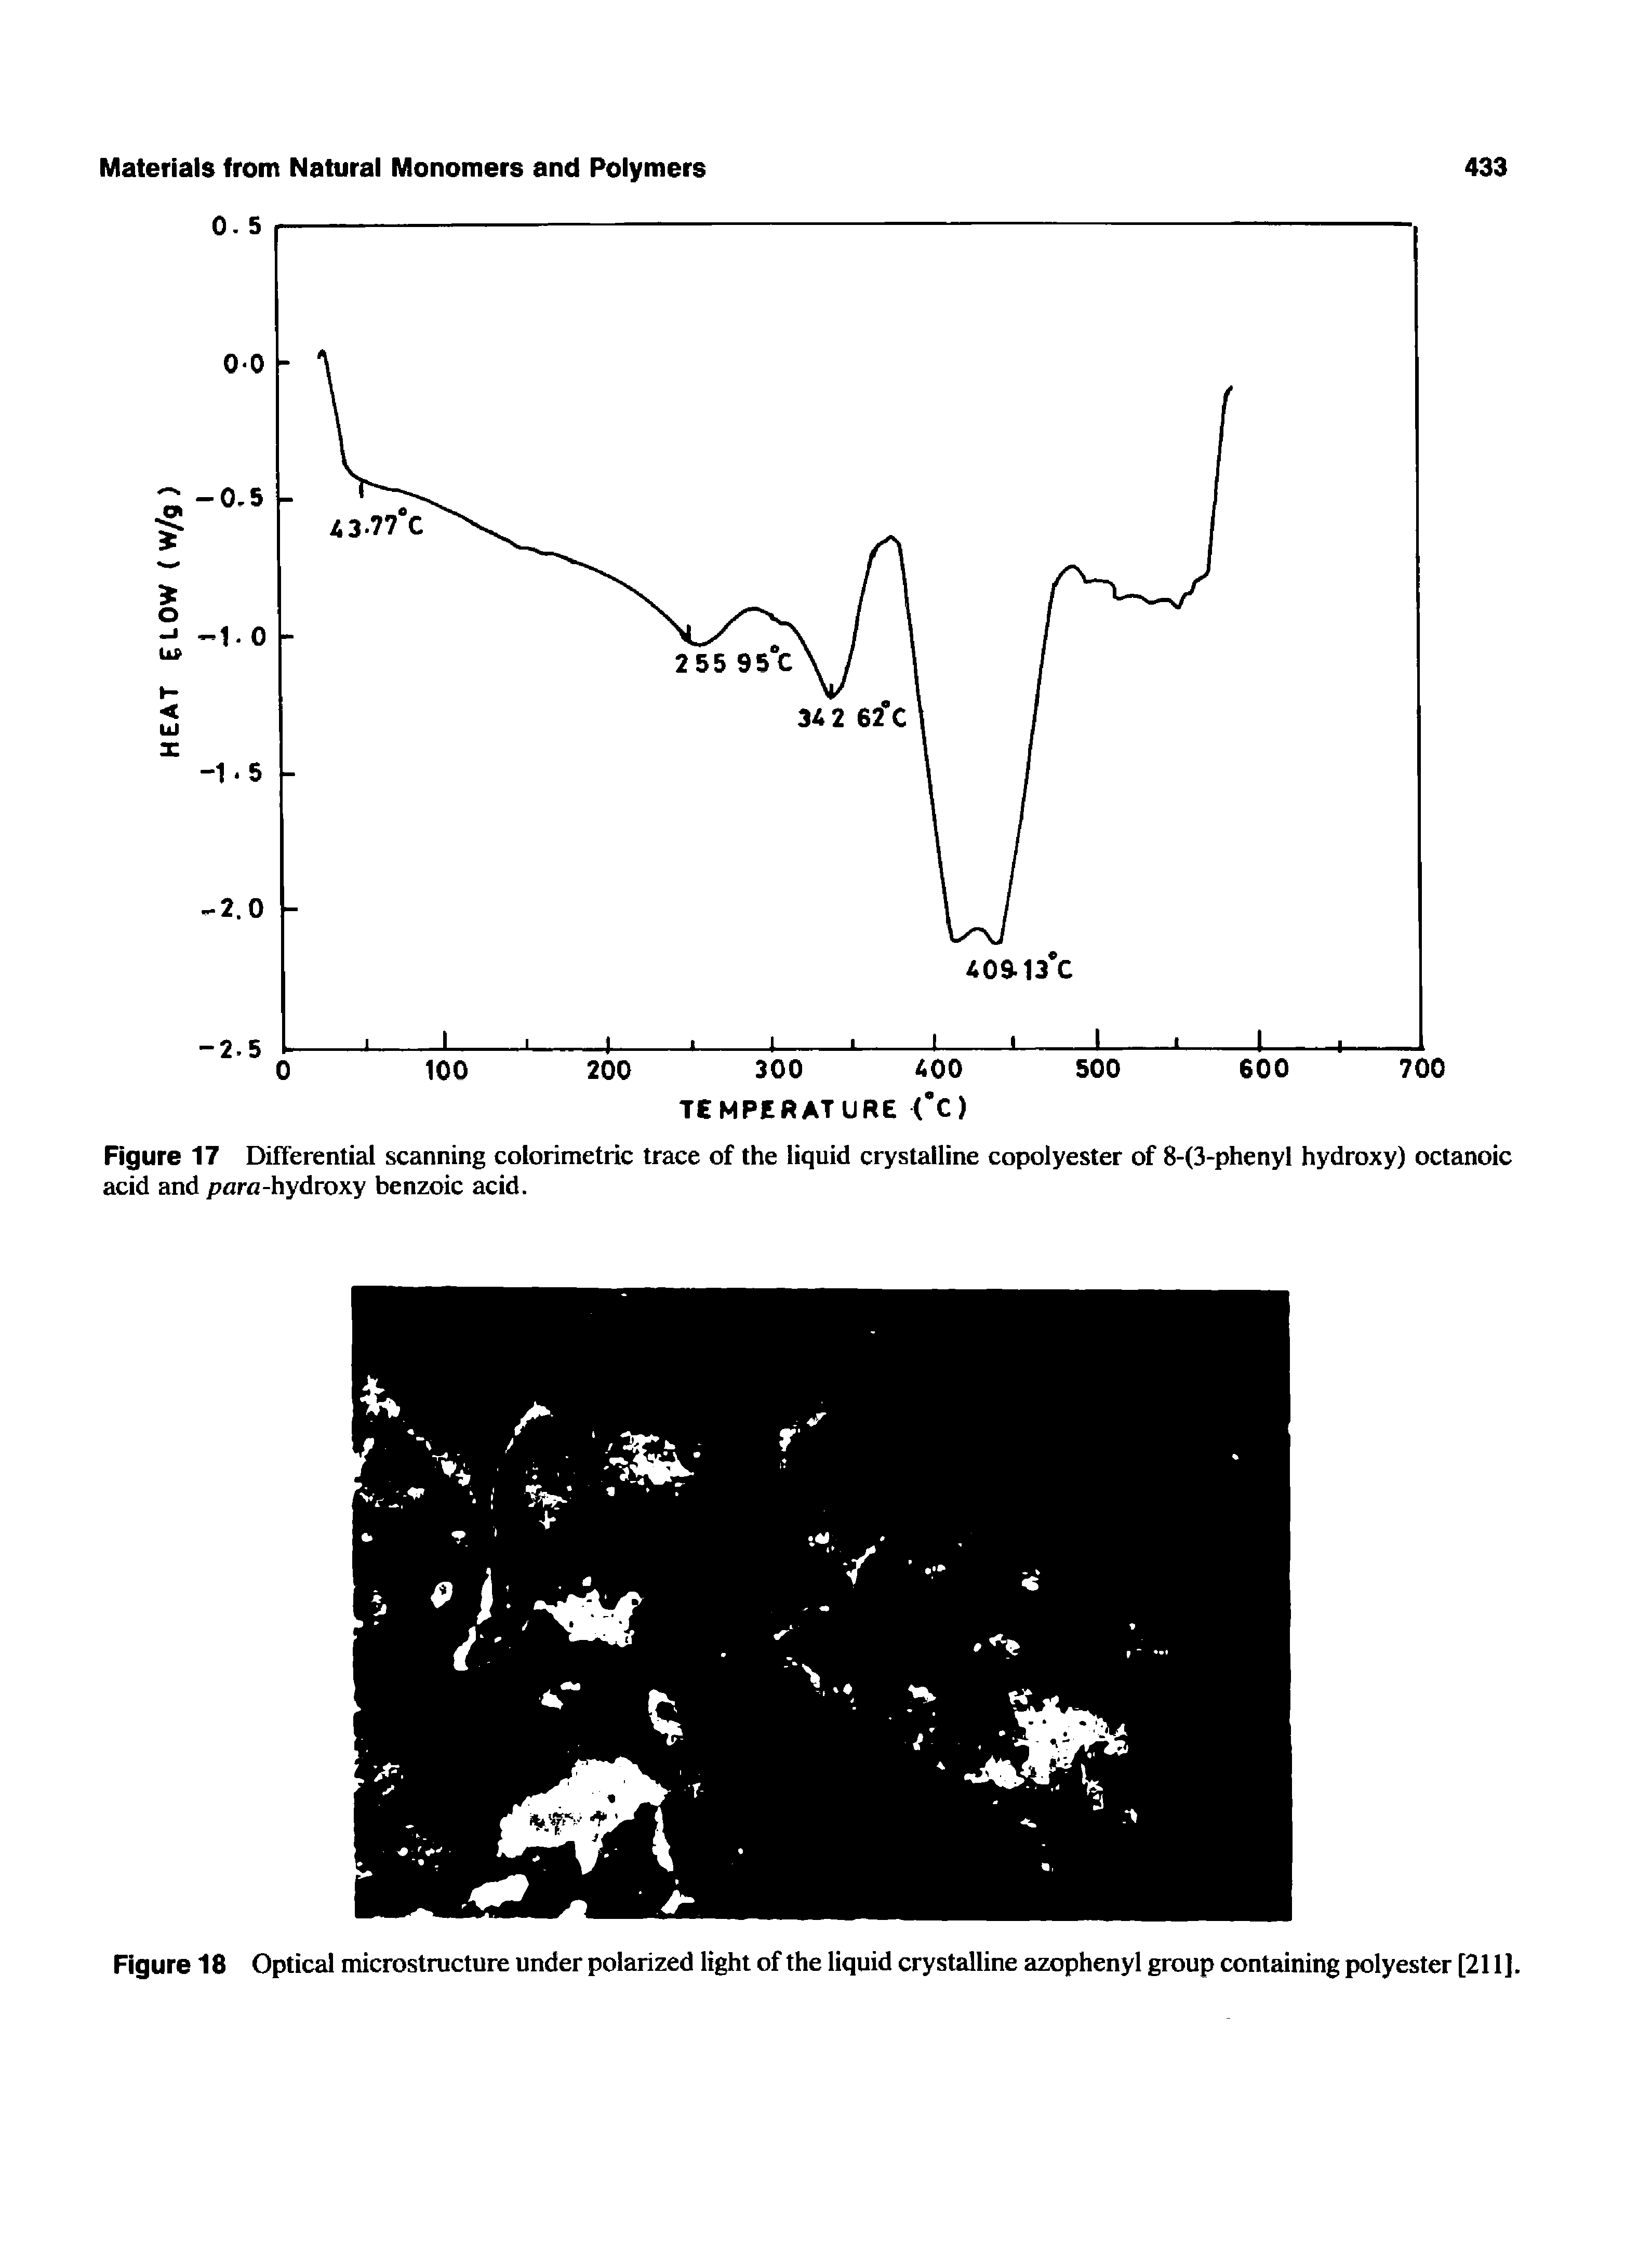 Figure 18 Optical microstructure under polarized light of the liquid crystalline azophenyl group containing polyester [21IJ.